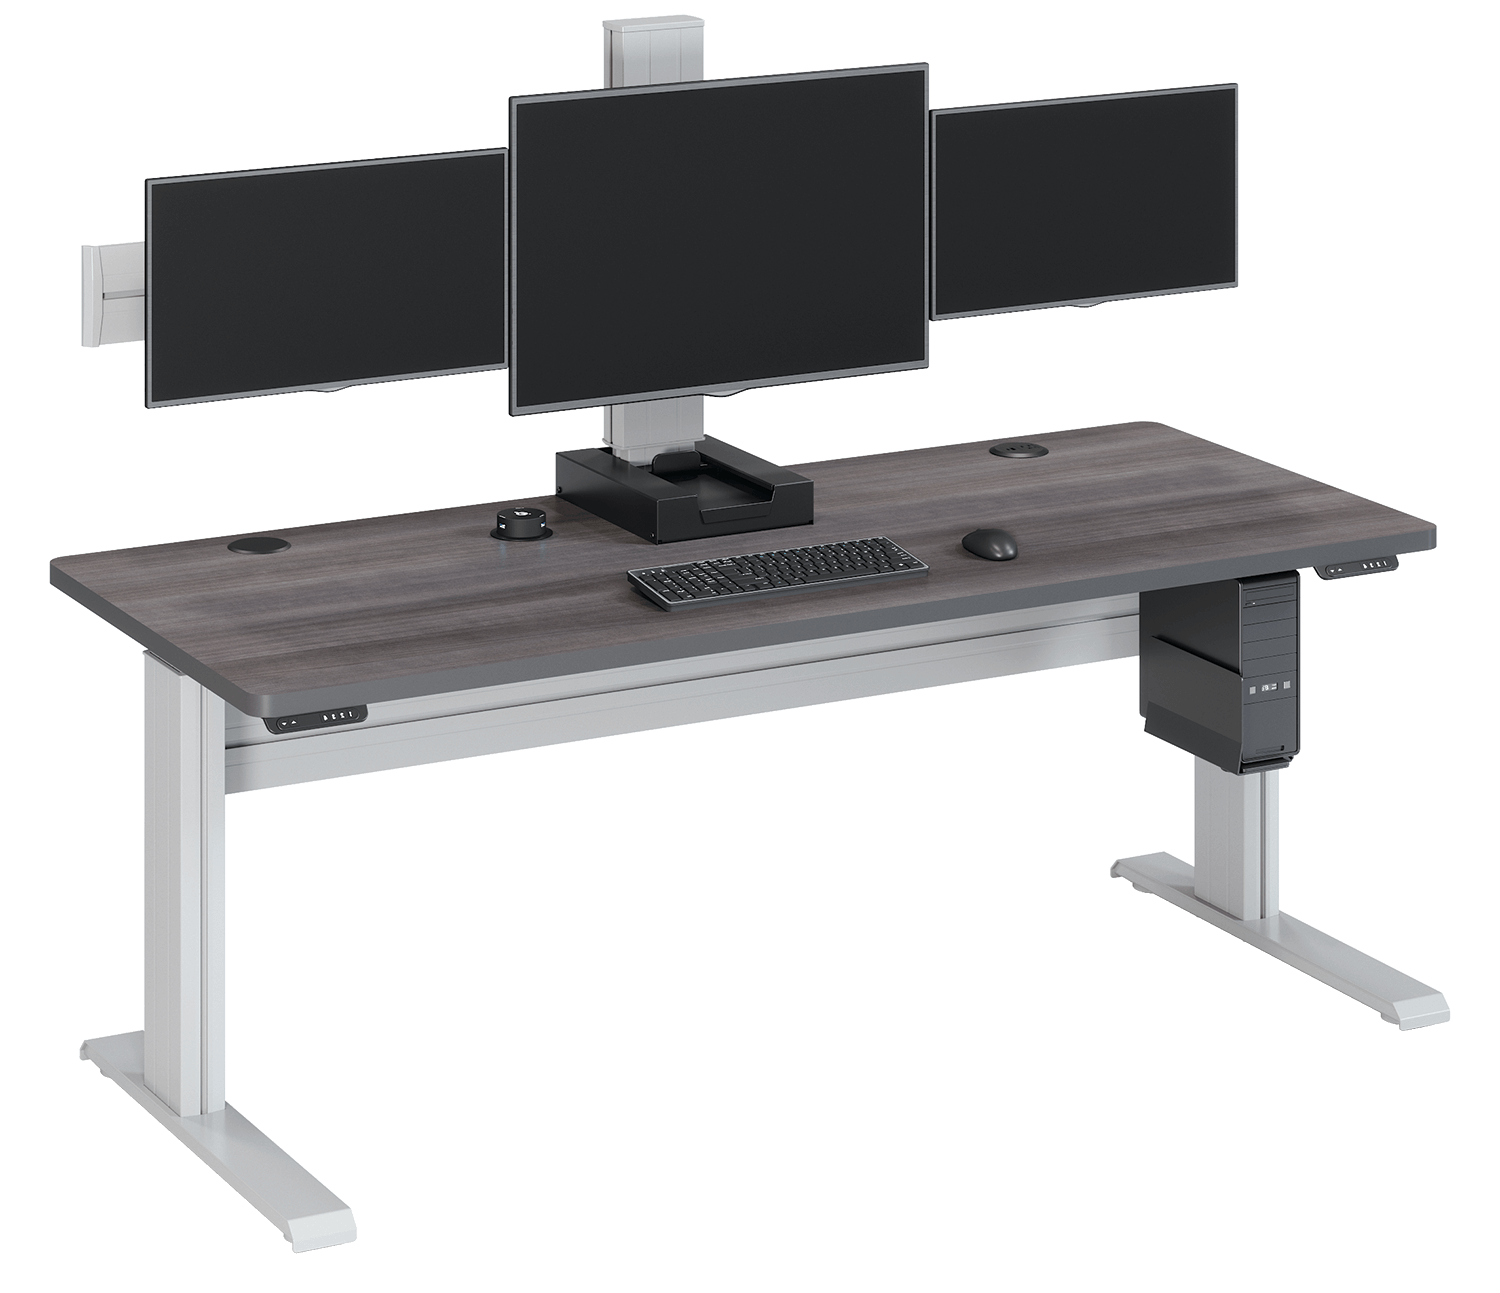 Hover E Glide Electric Monitor Arm Lift adjusts forward, back, up, and down